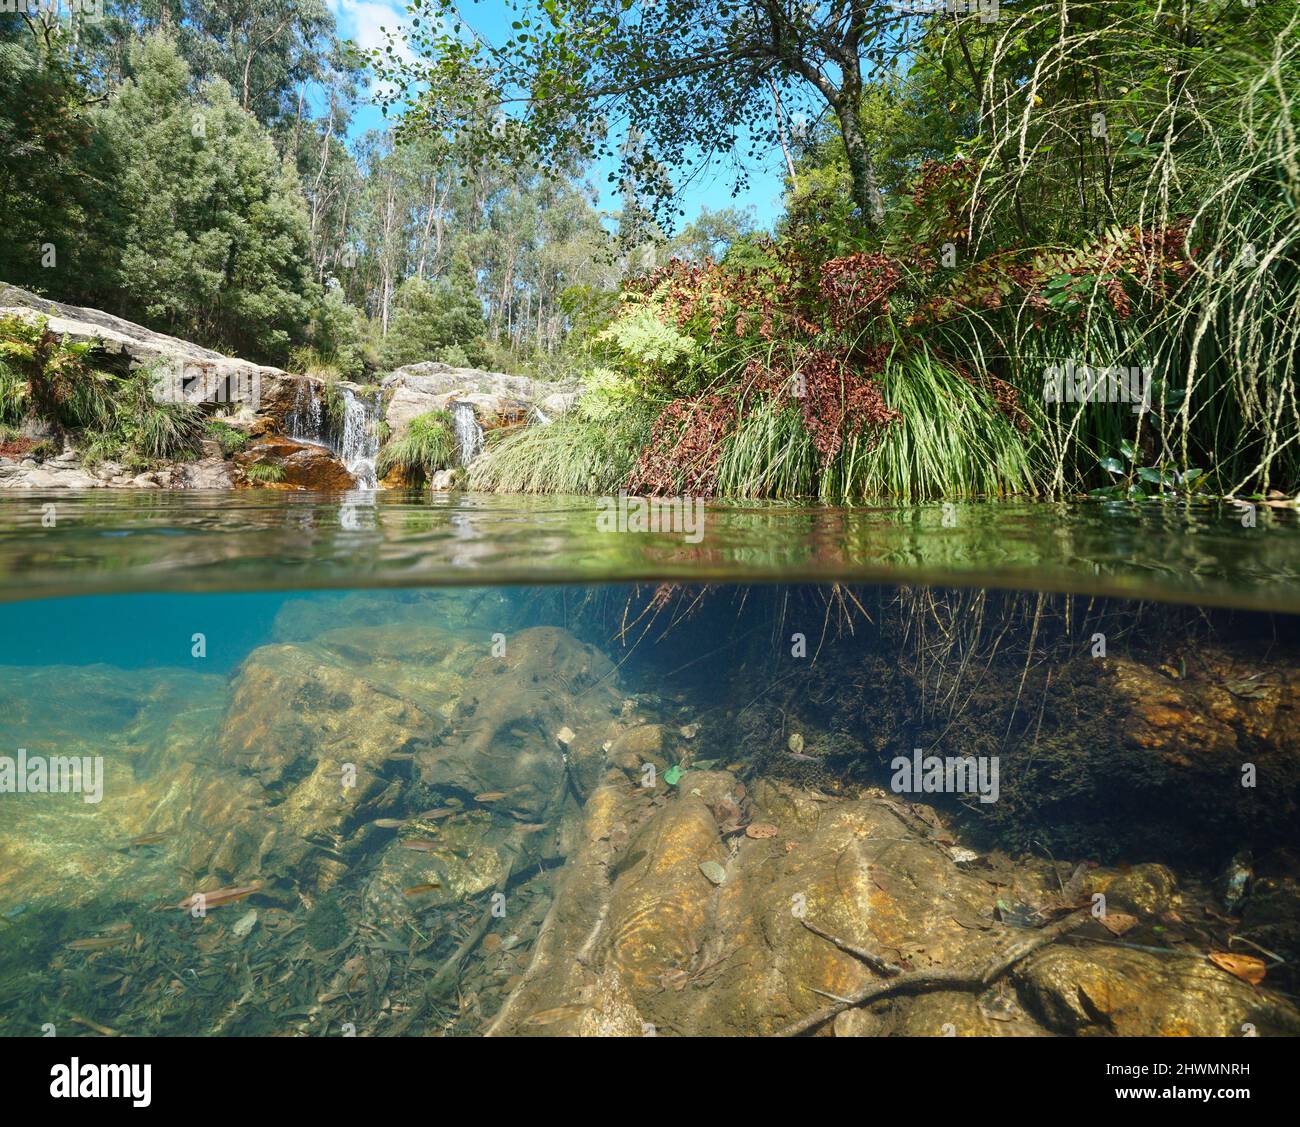 River bank vegetation with small waterfall in background, split level view over and under water, Spain, Galicia, Pontevedra province Stock Photo